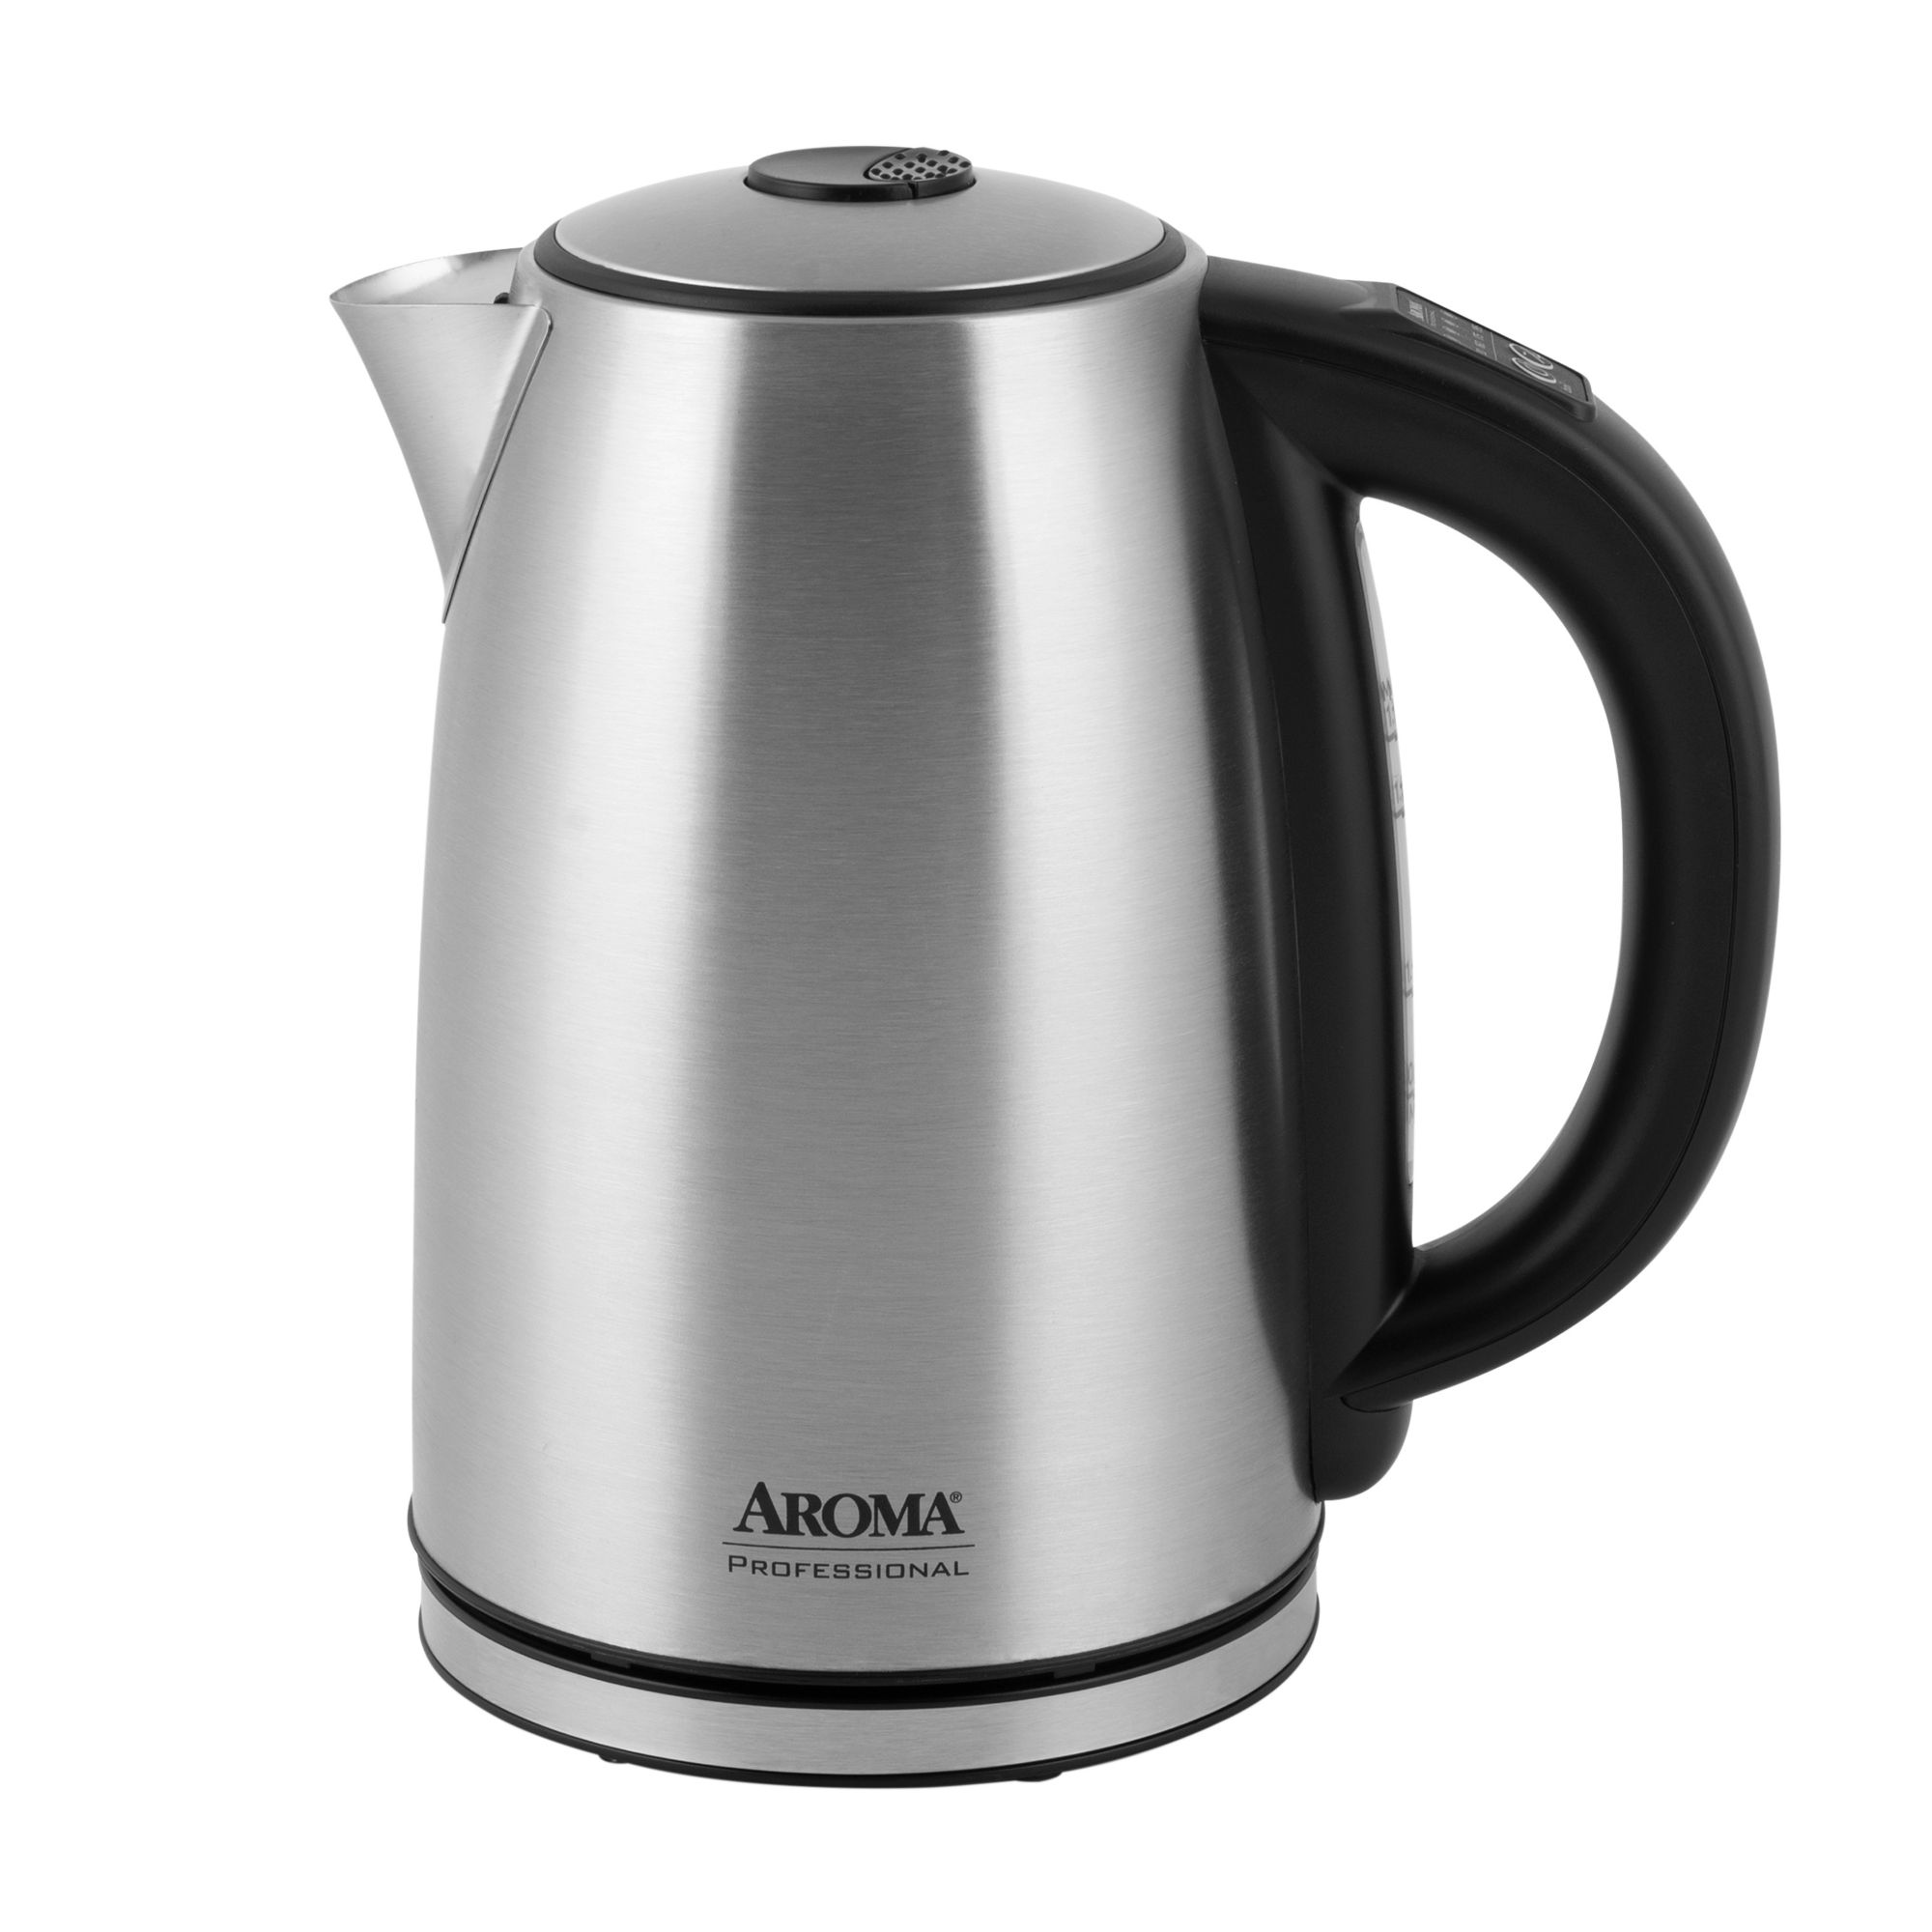 Best Buy: Aroma Electric Kettle Blue, Stainless Steel AWK-270BL